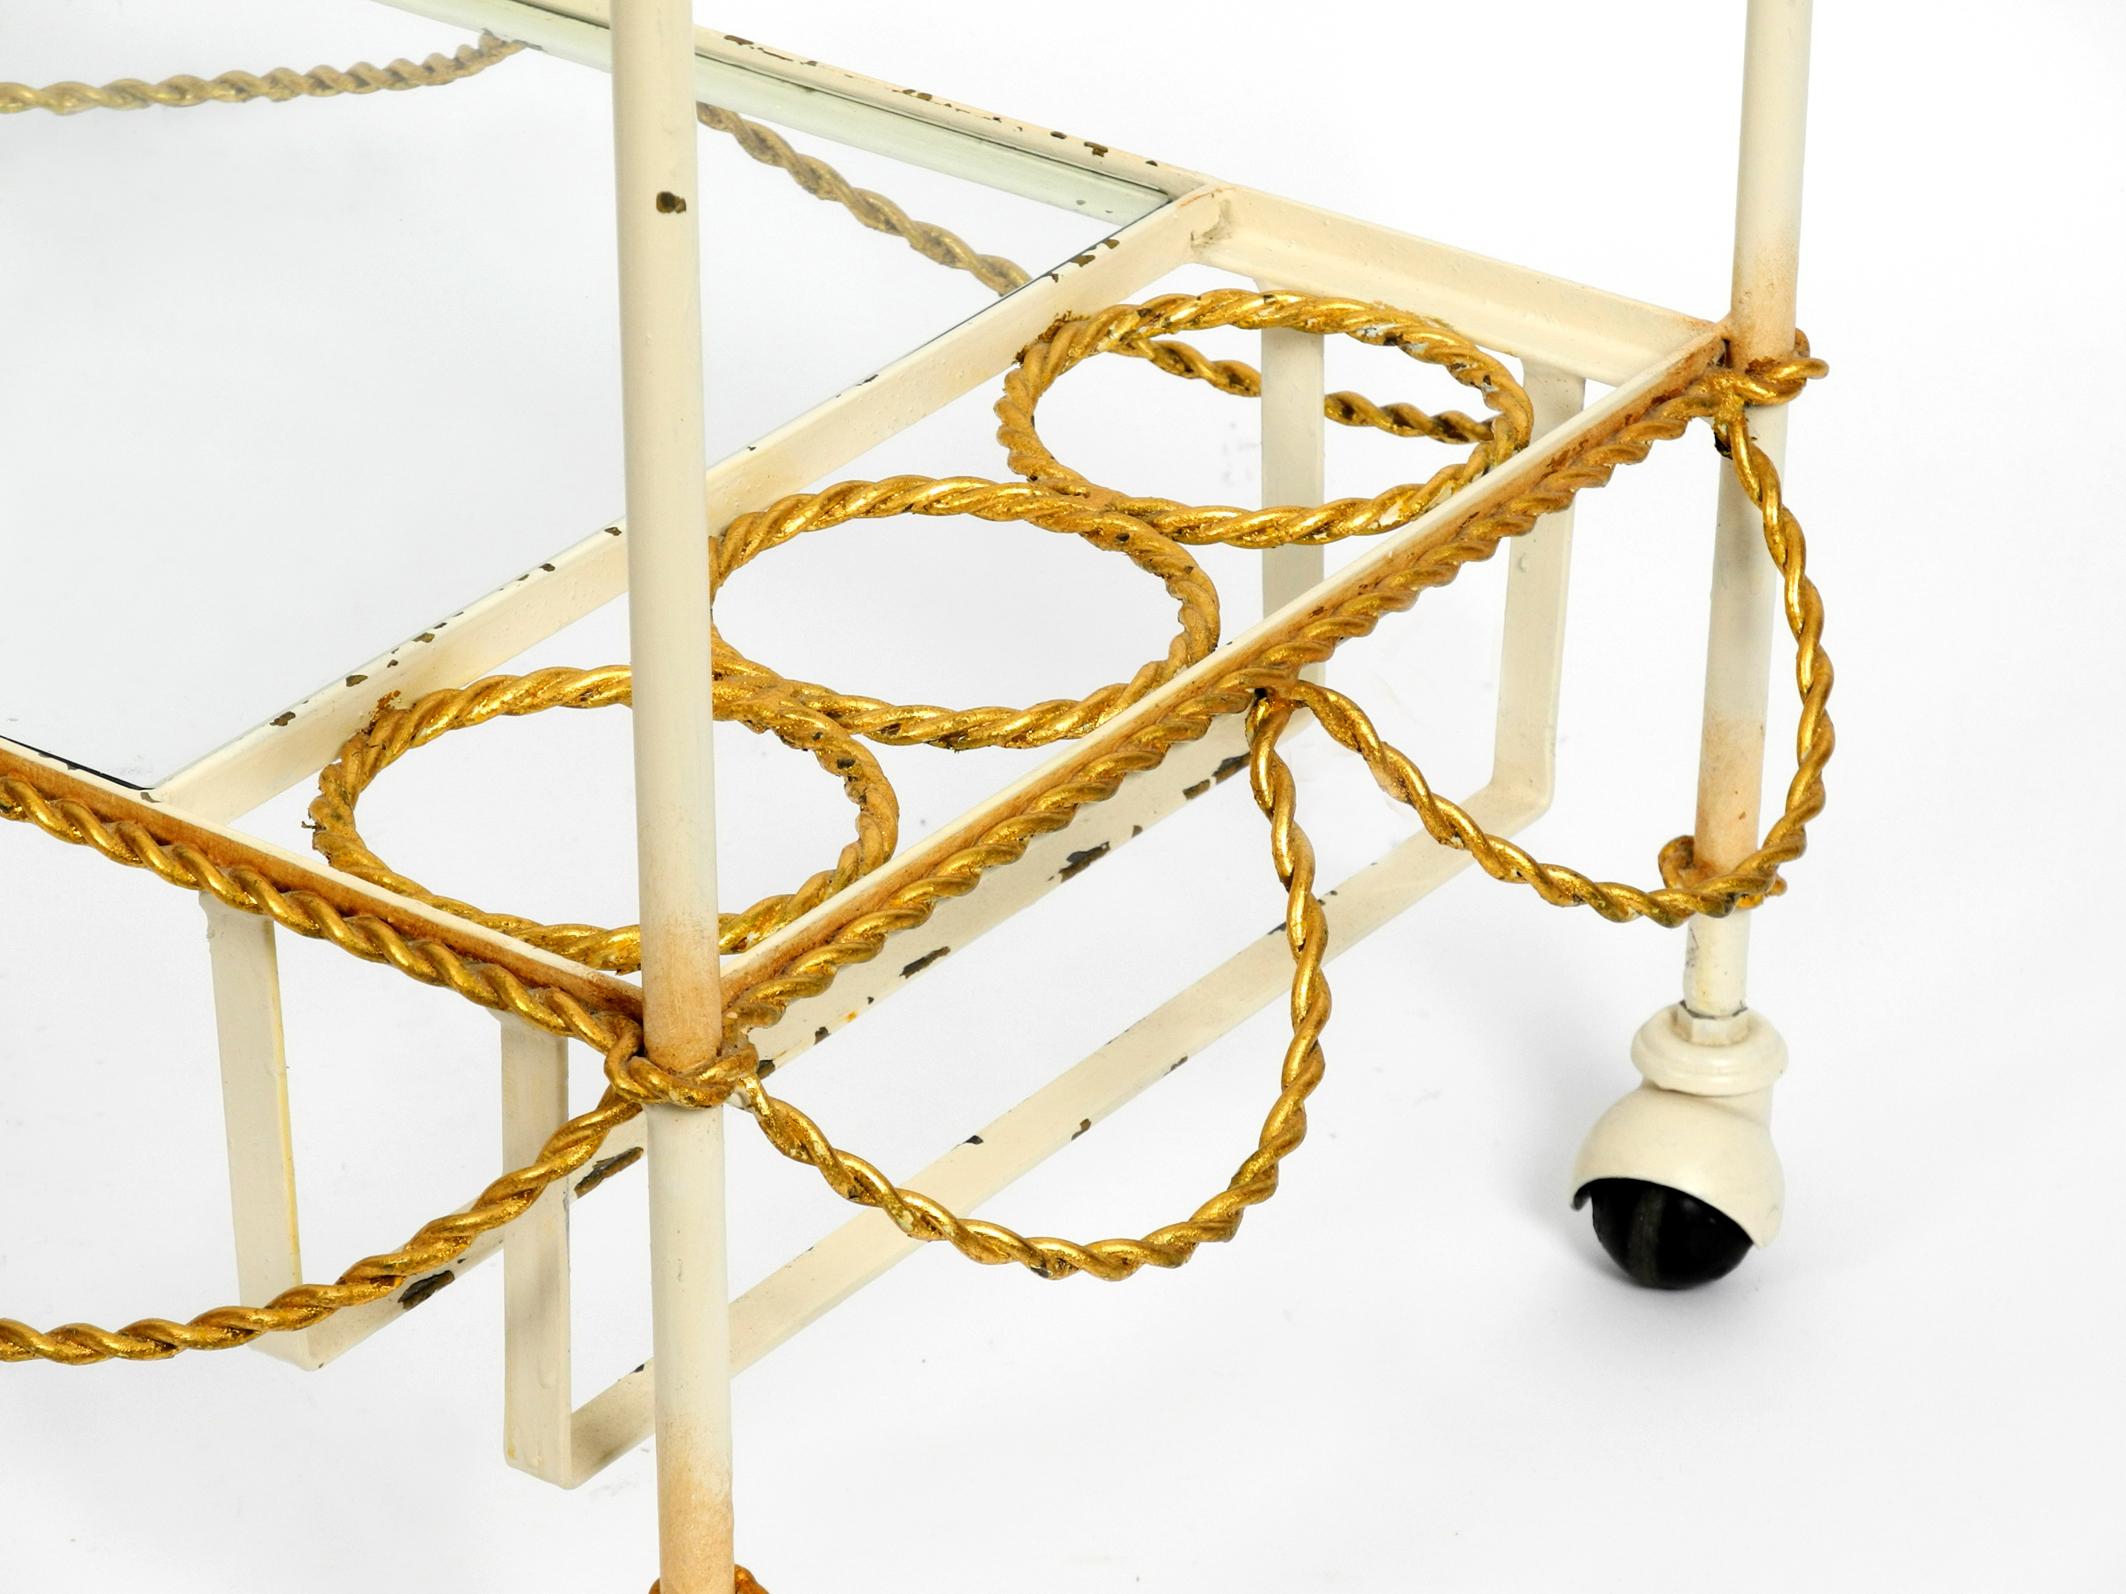 Italian Midcentury Bar Cart Made of Metal in Beige and Gold with Glass Elements For Sale 3